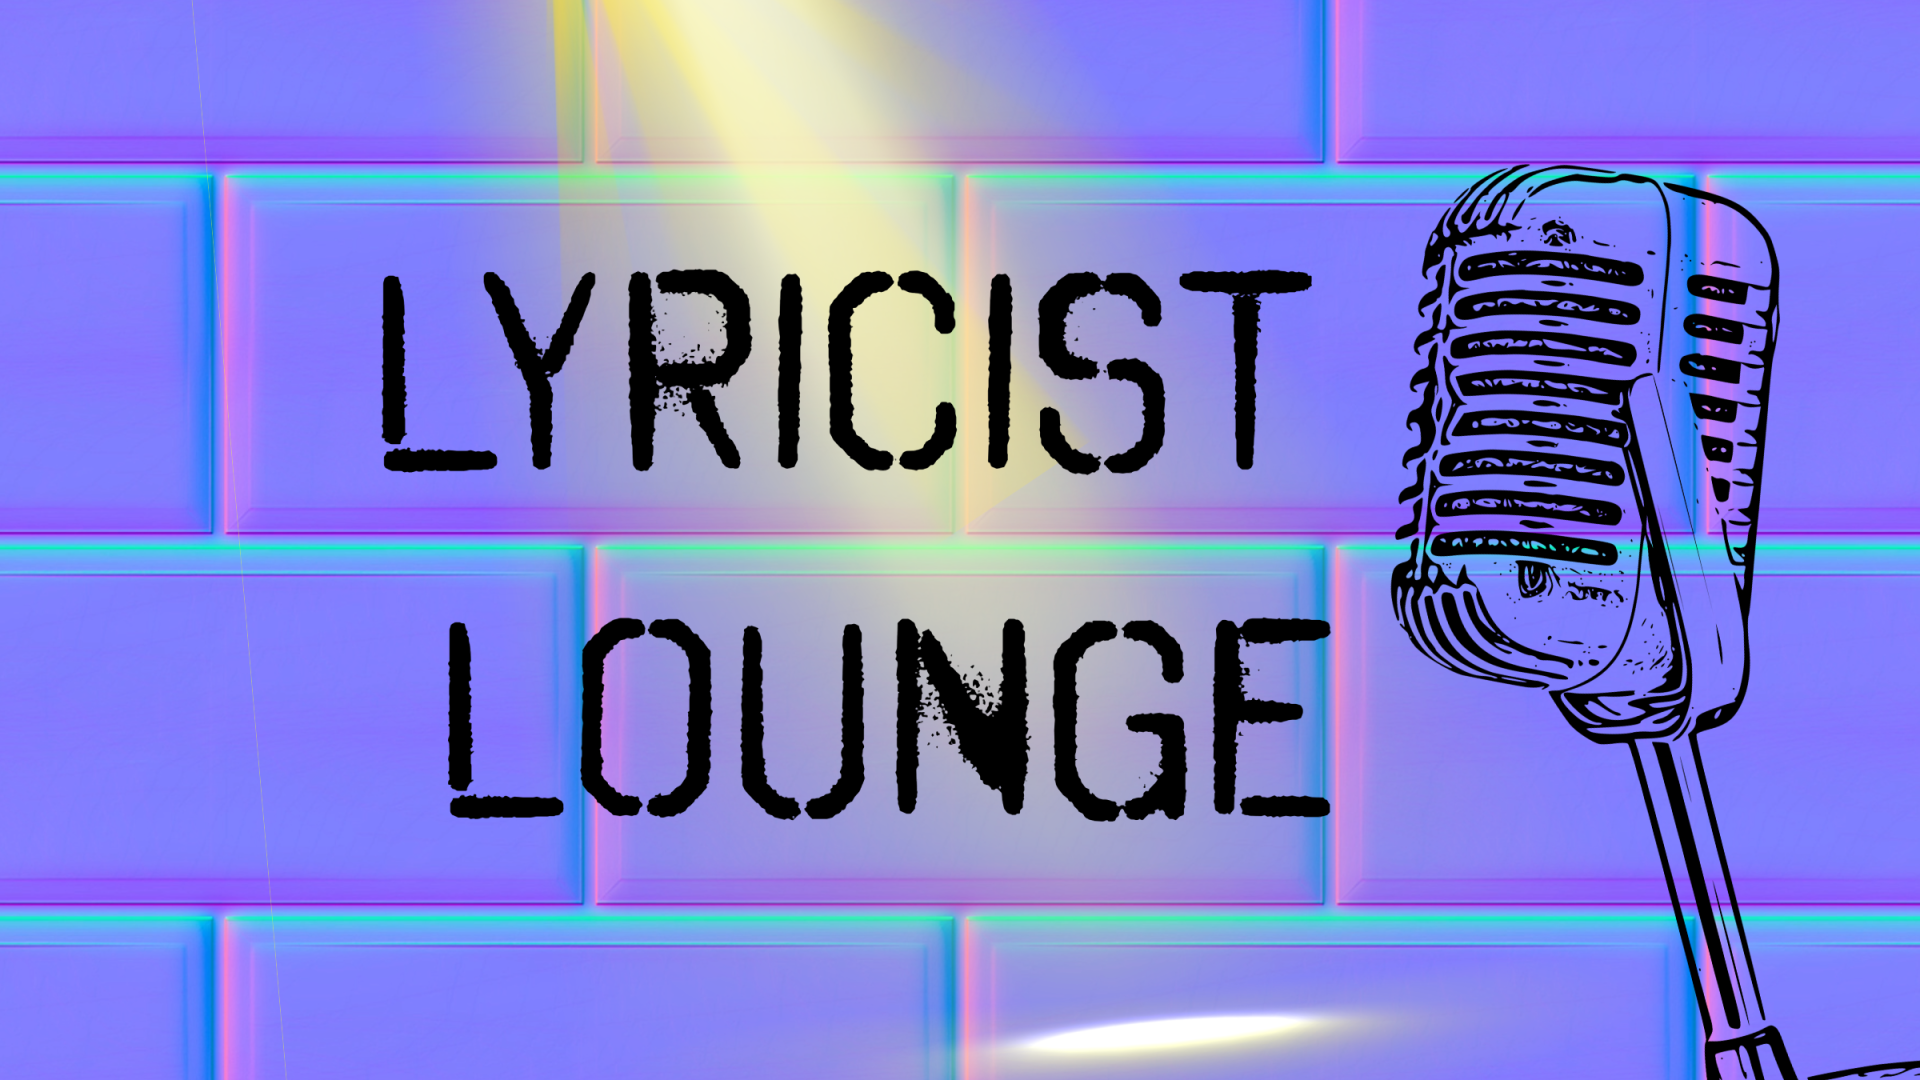 Lyricist Lounge in black text next to a mircophone with a spot light shown on the text against a purple brick background